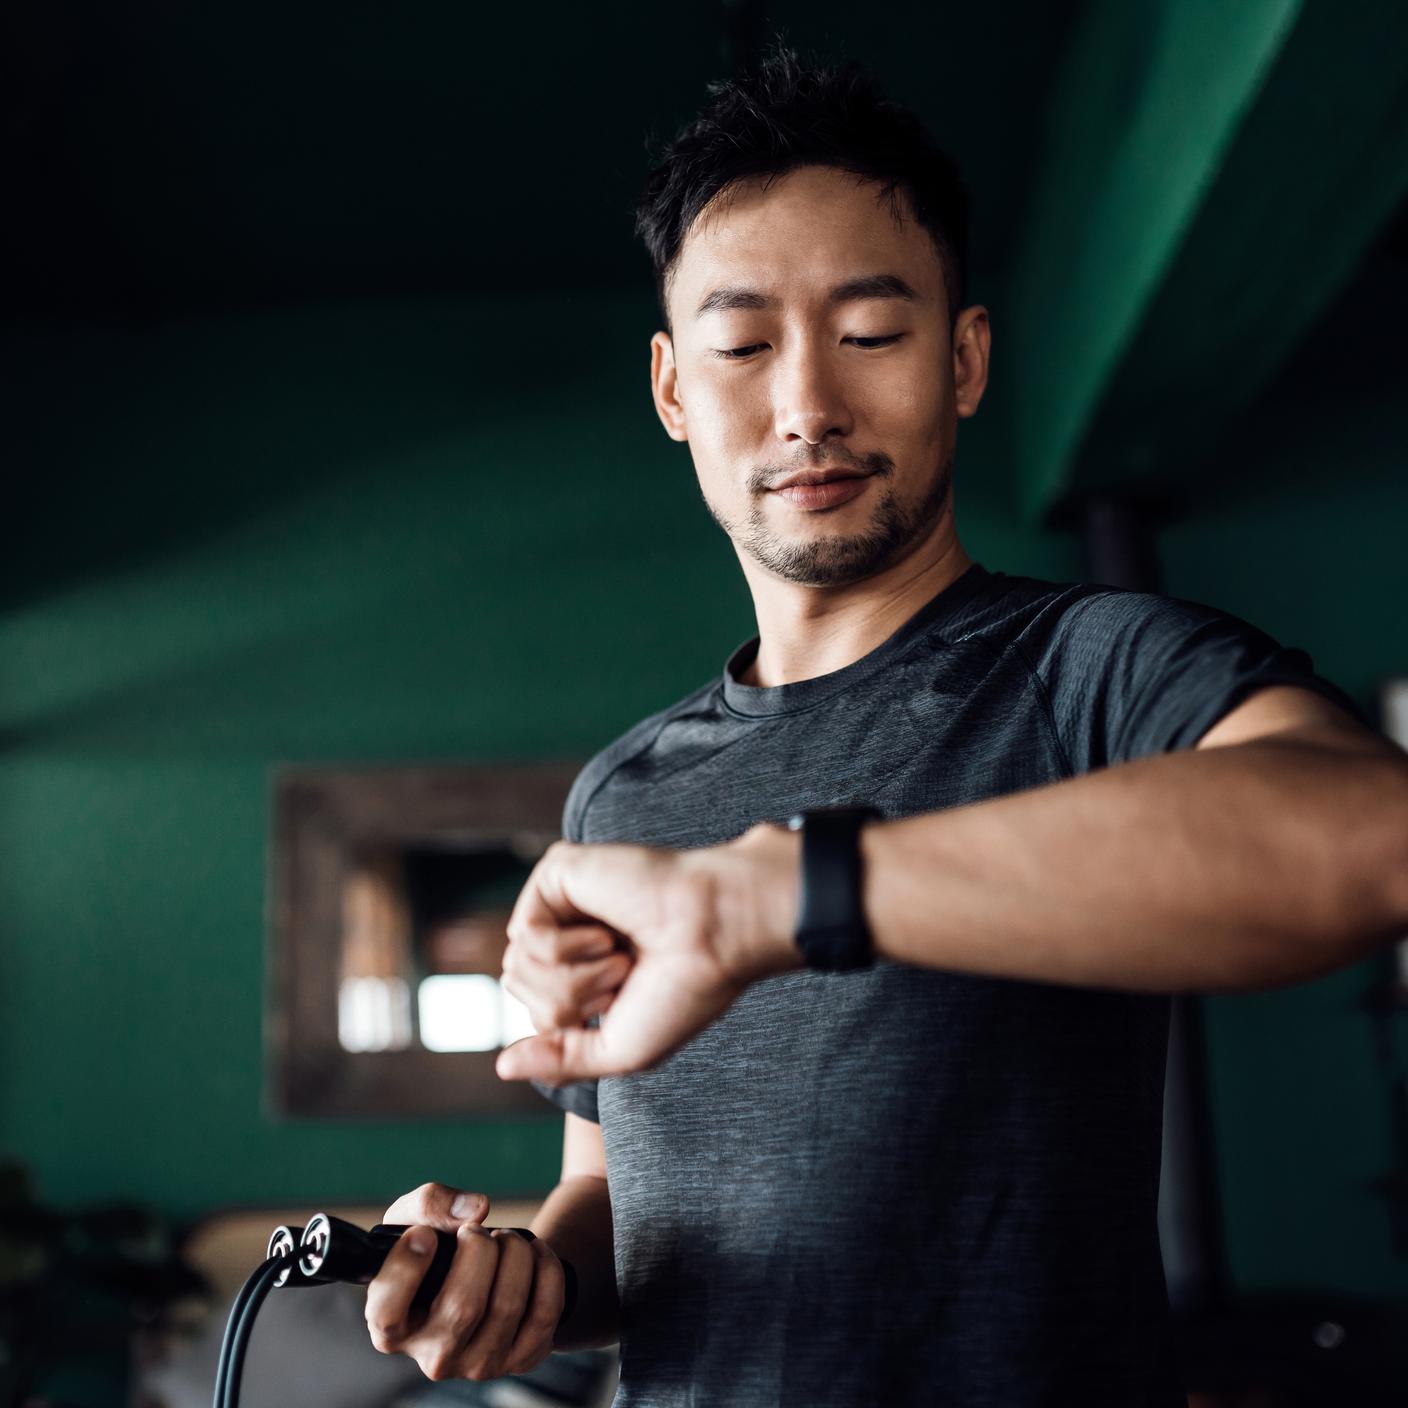 Man exercising at home, using fitness tracker app on smartwatch to monitor training progress